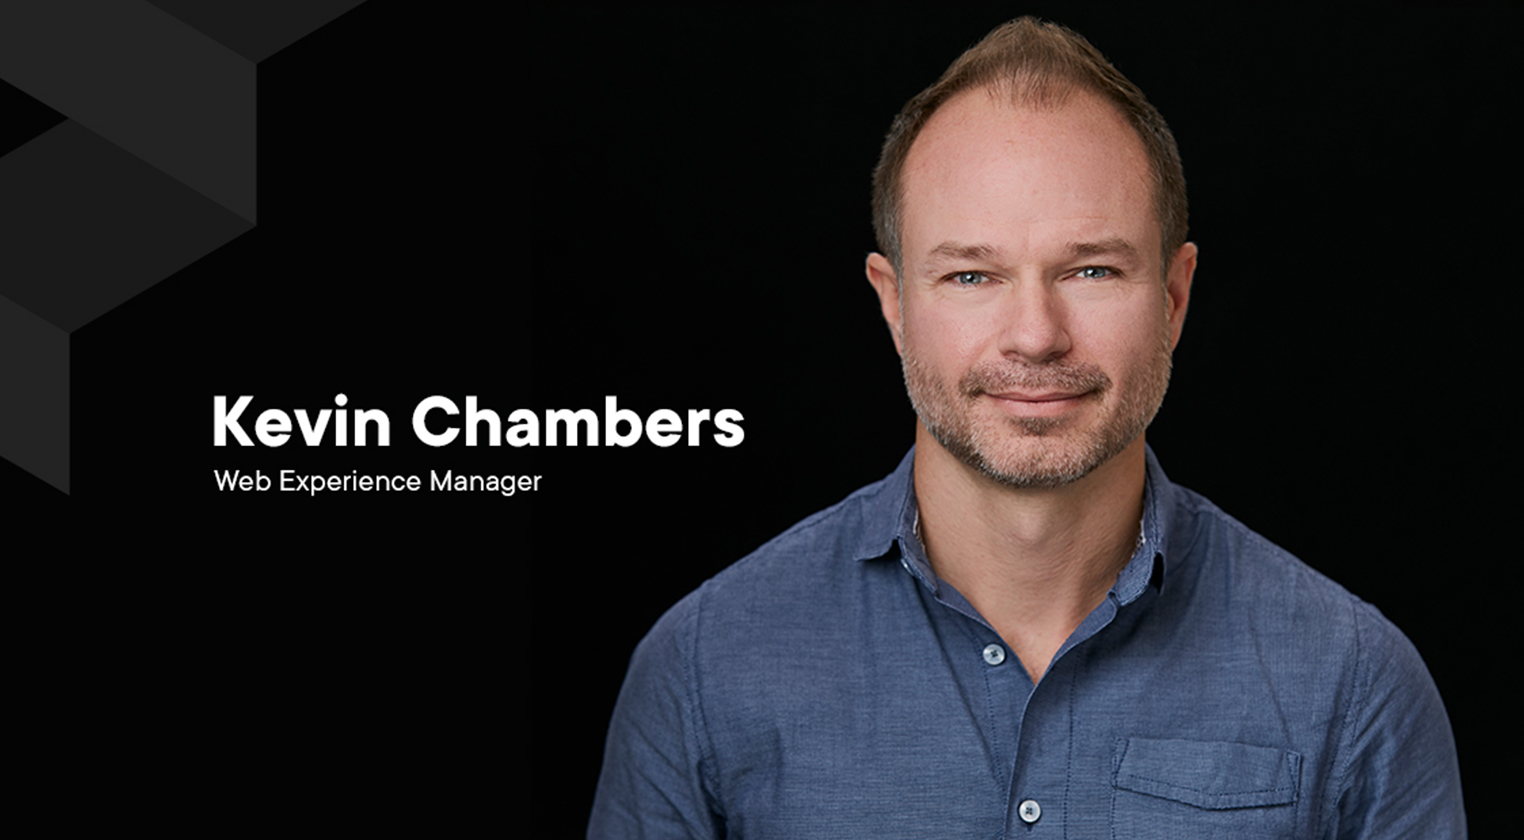 Meet Kevin Chambers